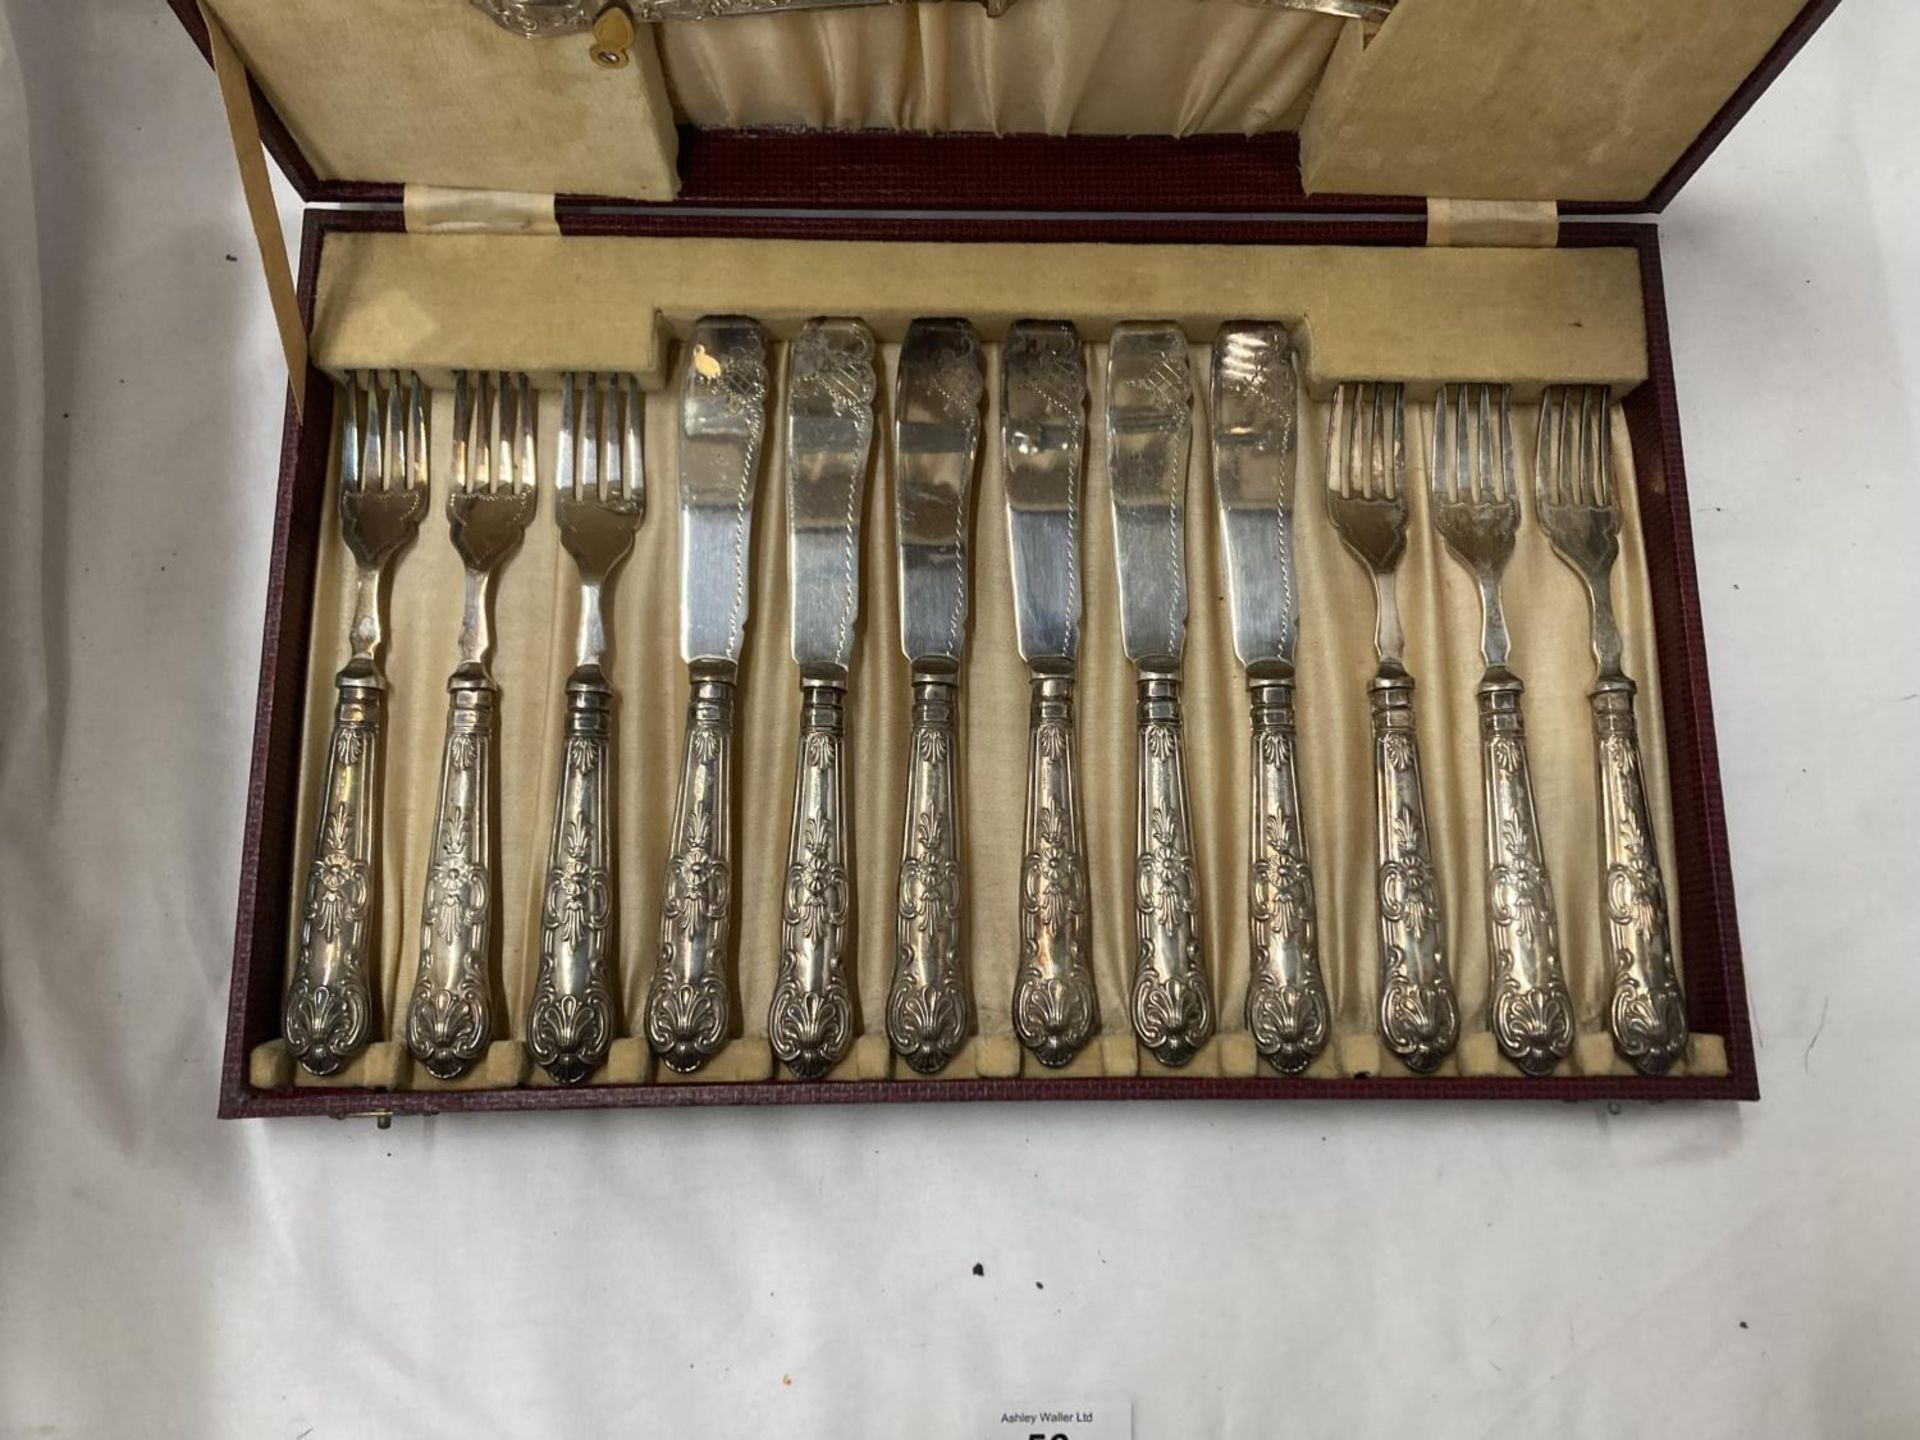 A HALLMARKED SHEFFIELD FISH CUTLERY SET TO INCLUDE KNIVES, FORKS AND SERVING SET IN A CASE - Image 2 of 5